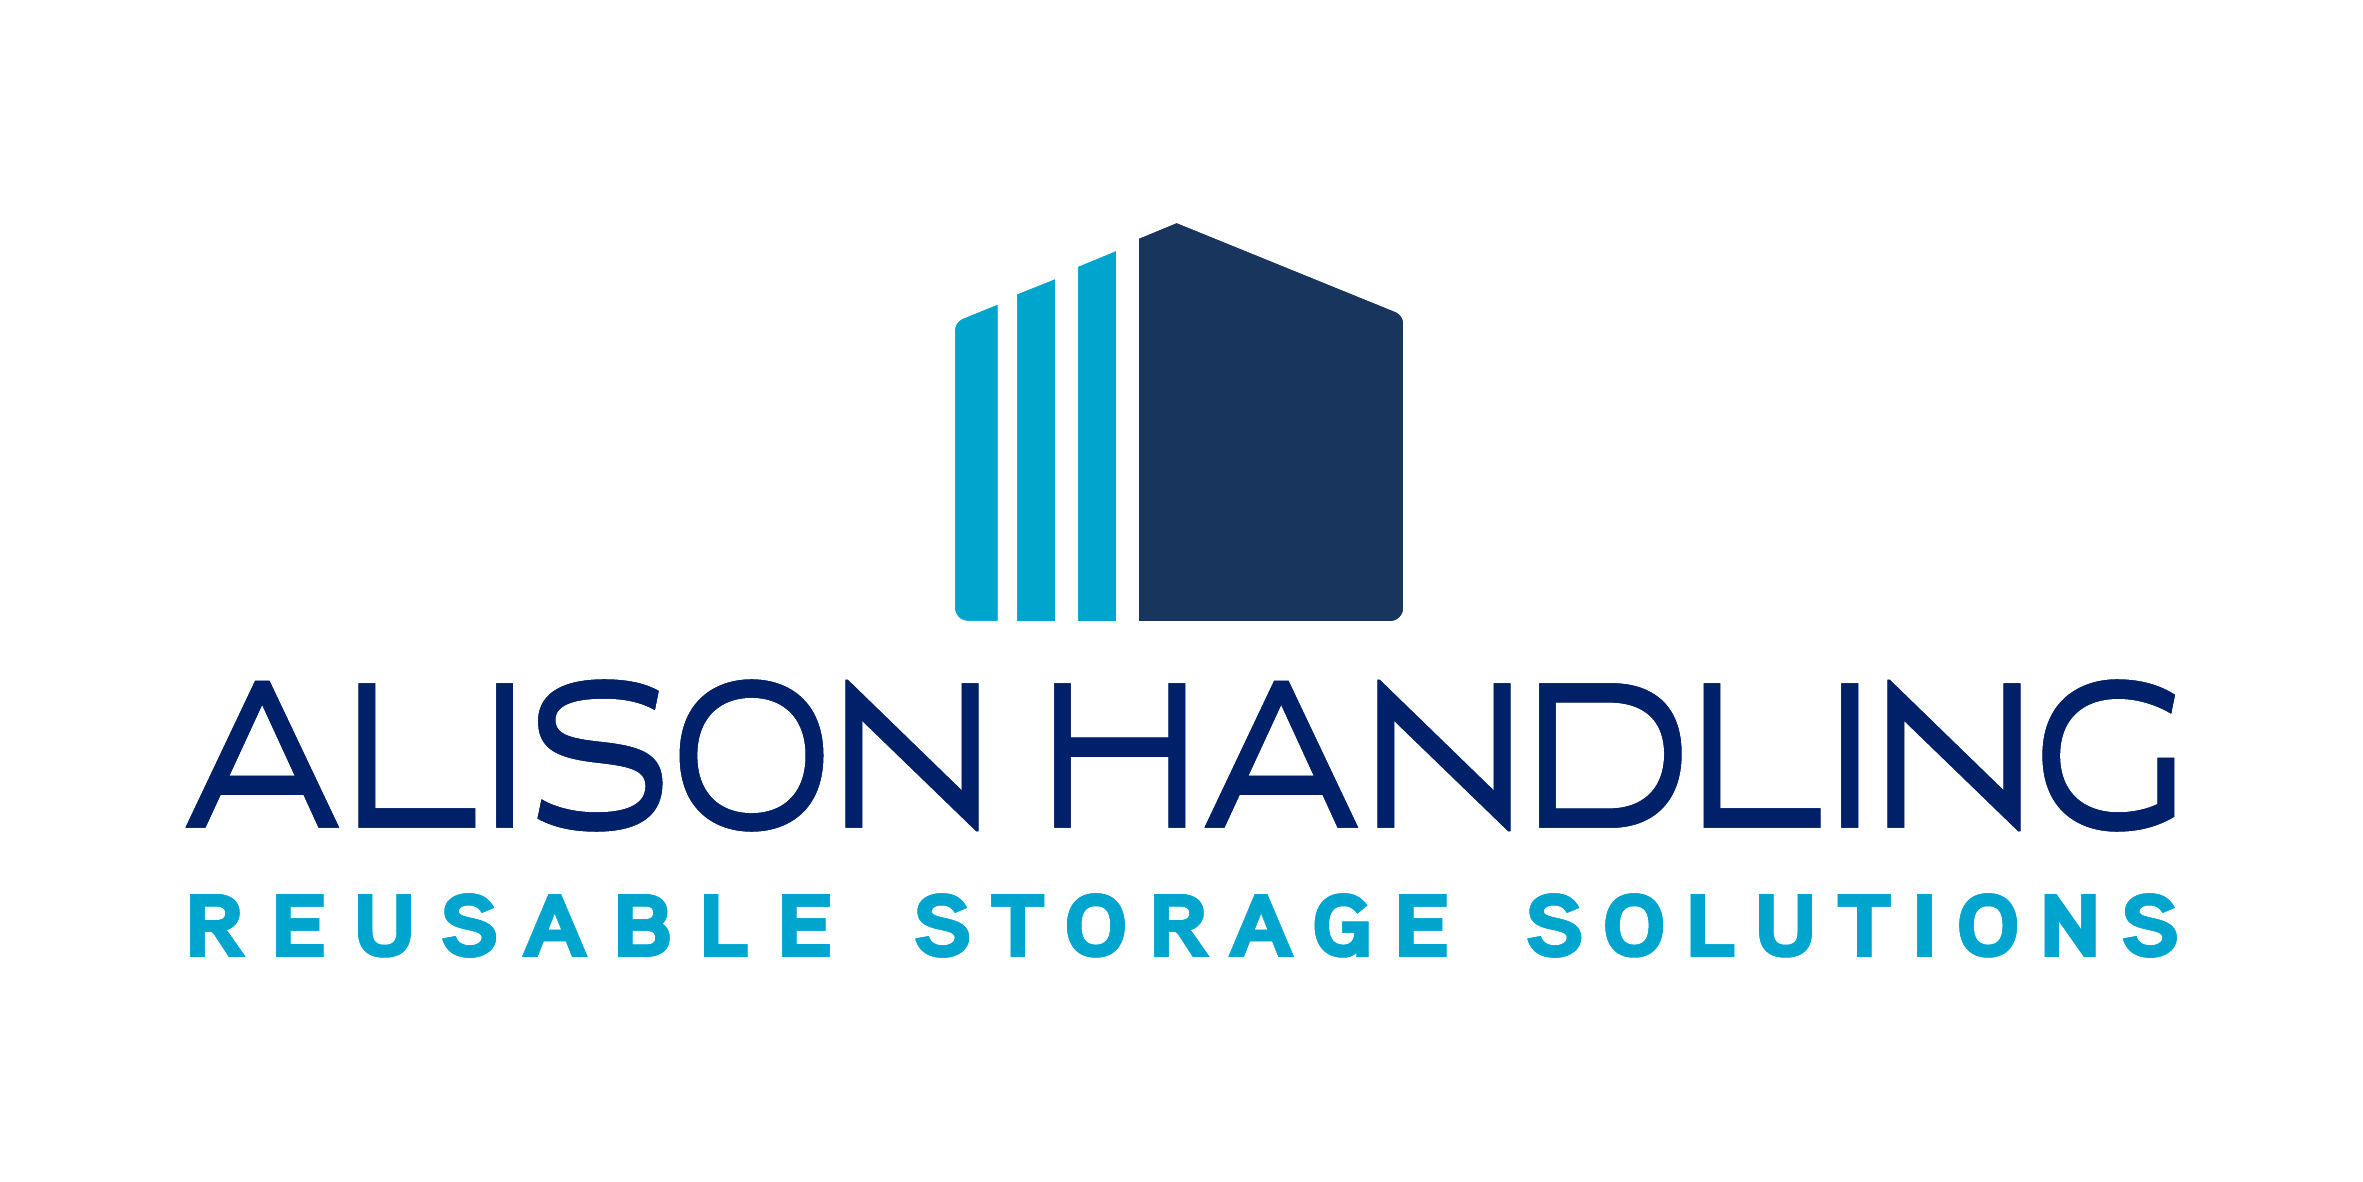 Company logo image - Alison Handling Services Limited